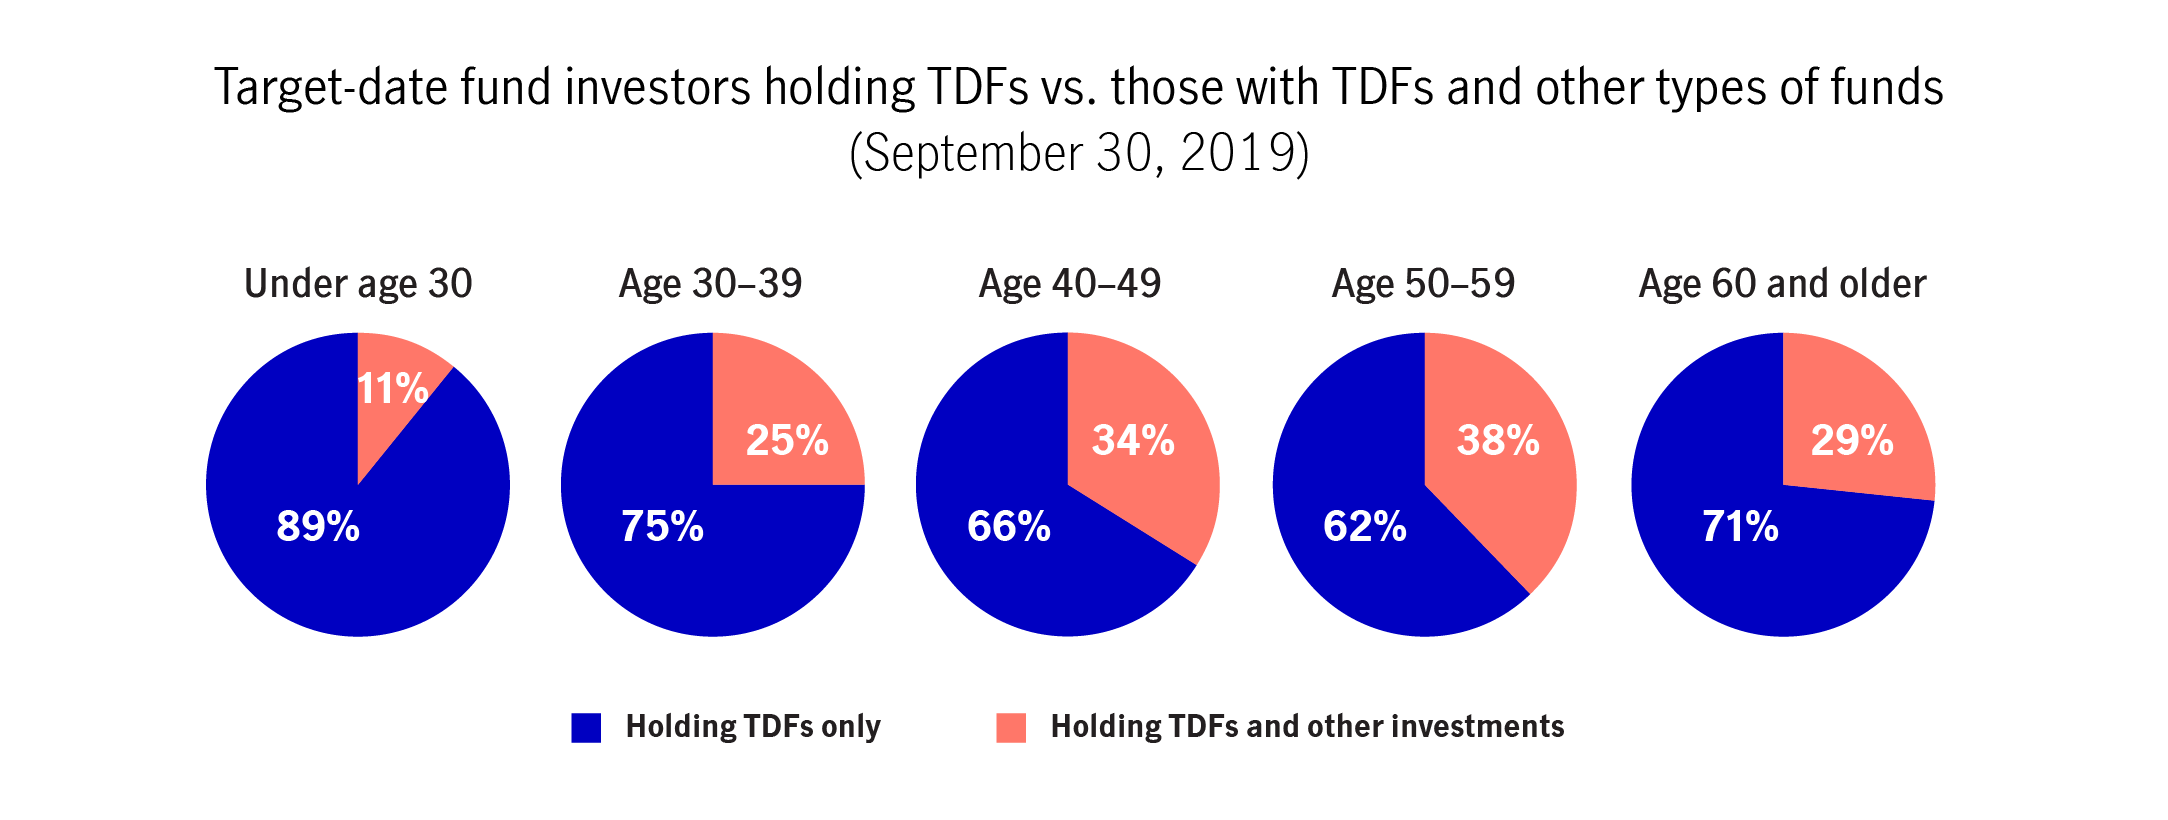 A series of pie charts tracks the number the percentage of TDF investors holding only TDFs versus those holding TDFs and other types of funds as of September 39, 2019. In every age category, those holding only TDFs is far higher. Percentages range from 62% for those age 50 to 59, to 89% for investors under age 40.